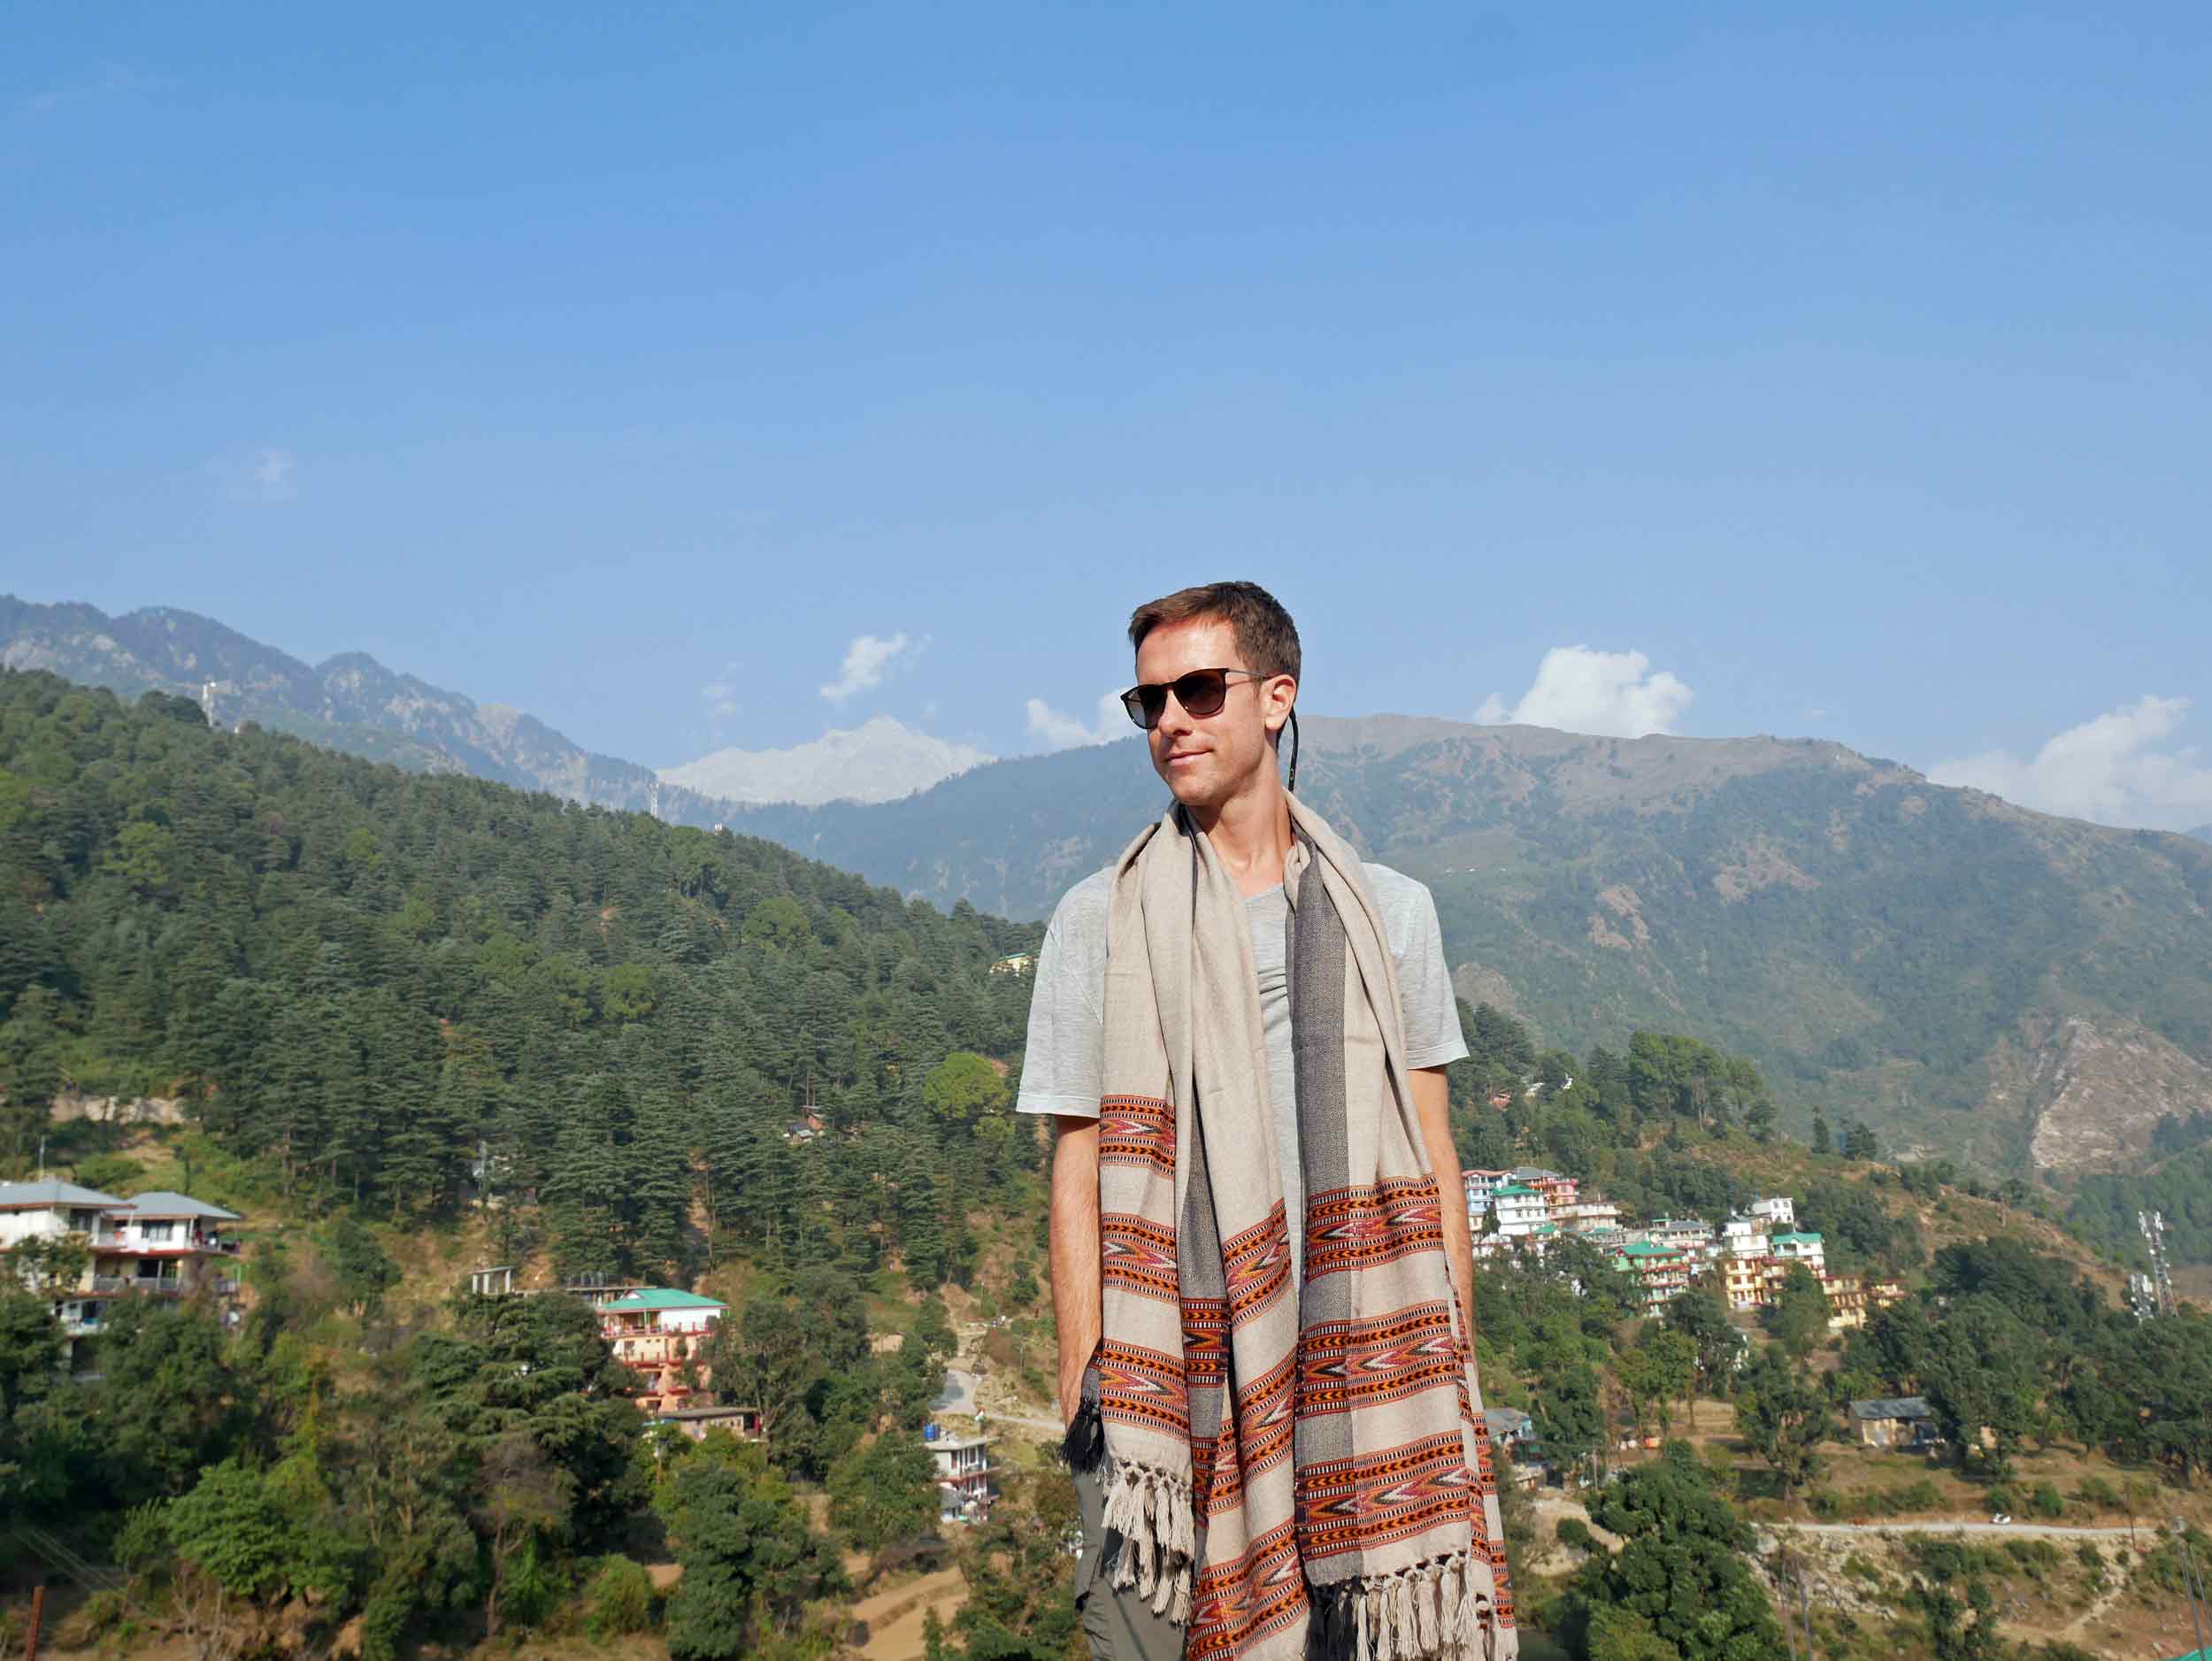  Martin wearing a Tibetan shawl and taking in the sunshine on our roof deck, overlooking the Buddhist village in the Himalayas. 